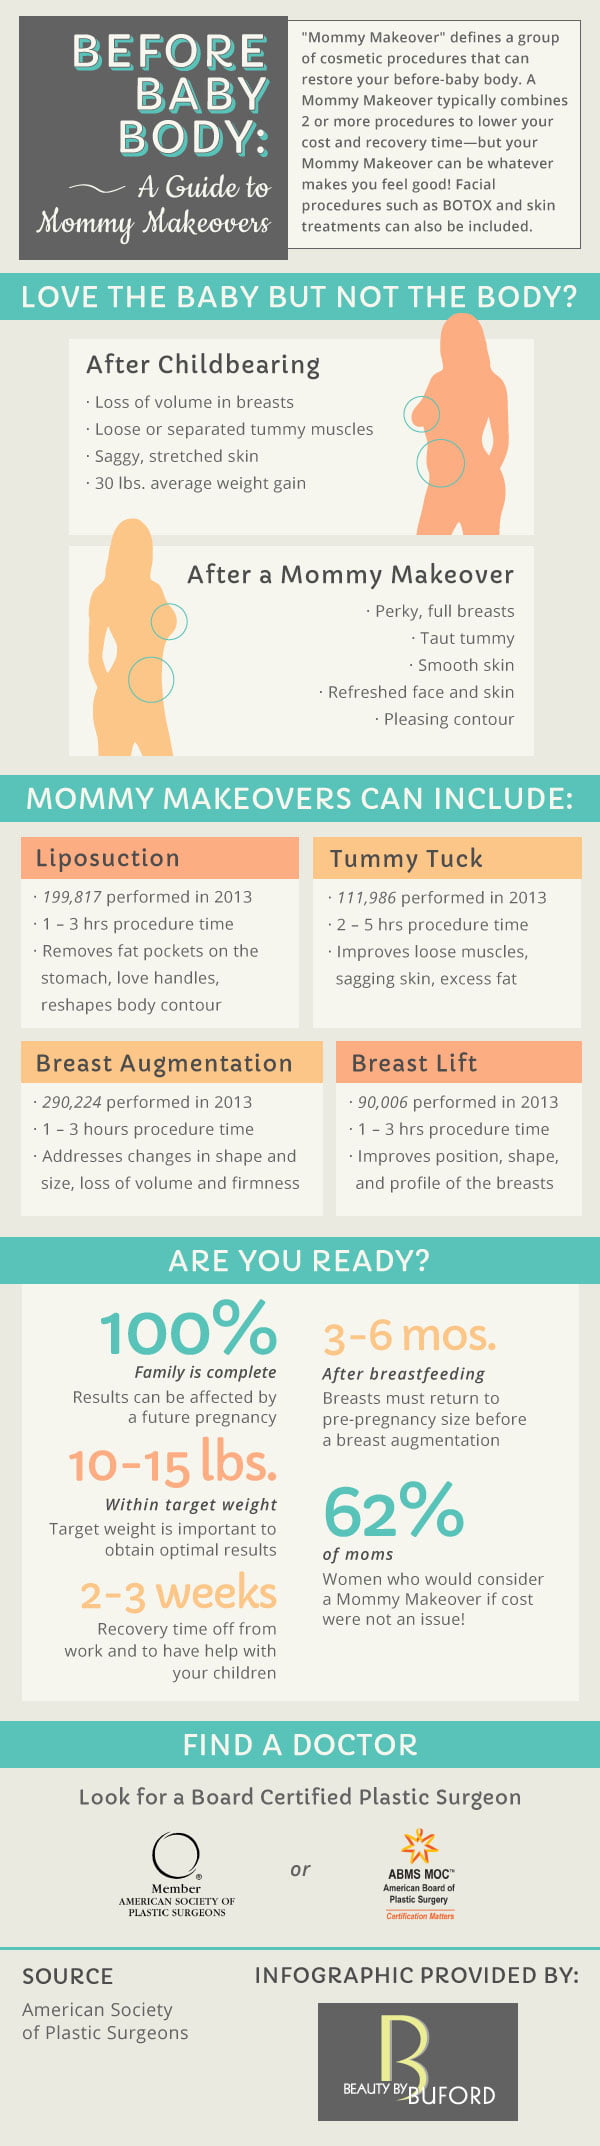 buford-infographic-mommy-makeover